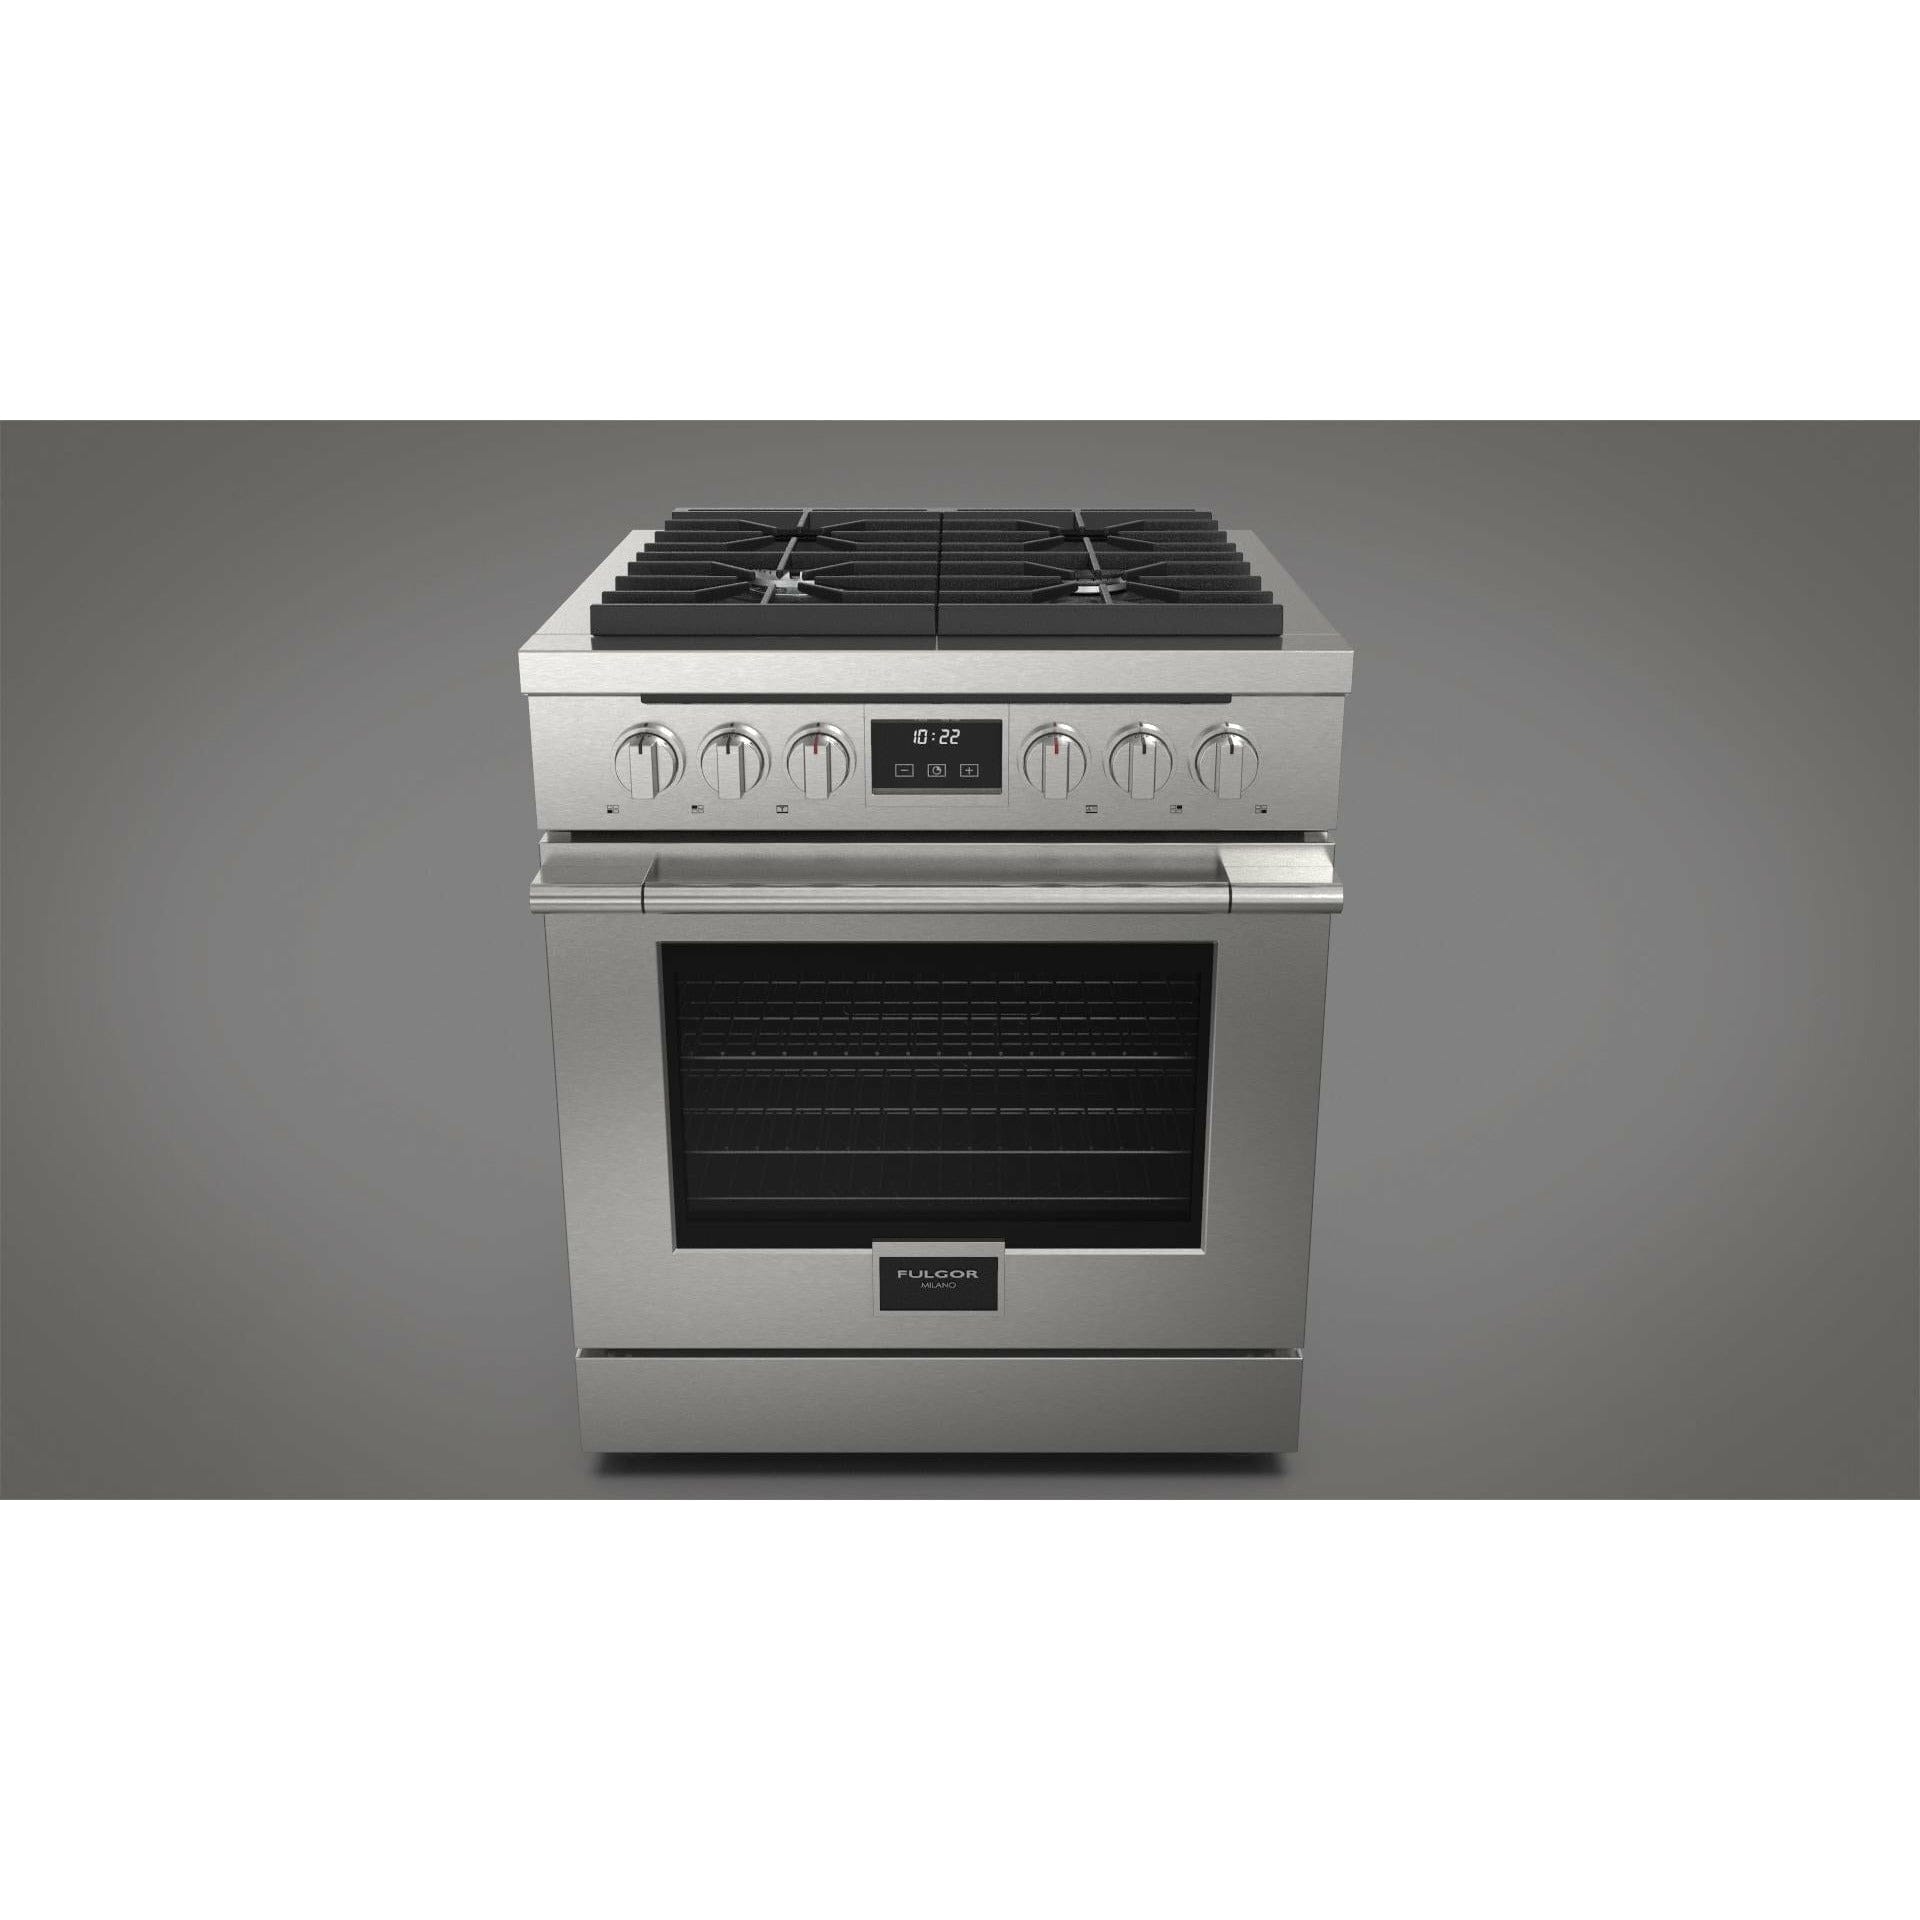 Fulgor Milano 30" Freestanding All Gas Range with 2 Duel Flame Burners, Stainless Steel - F4PGR304S2 Ranges F4PGR304S2 Luxury Appliances Direct